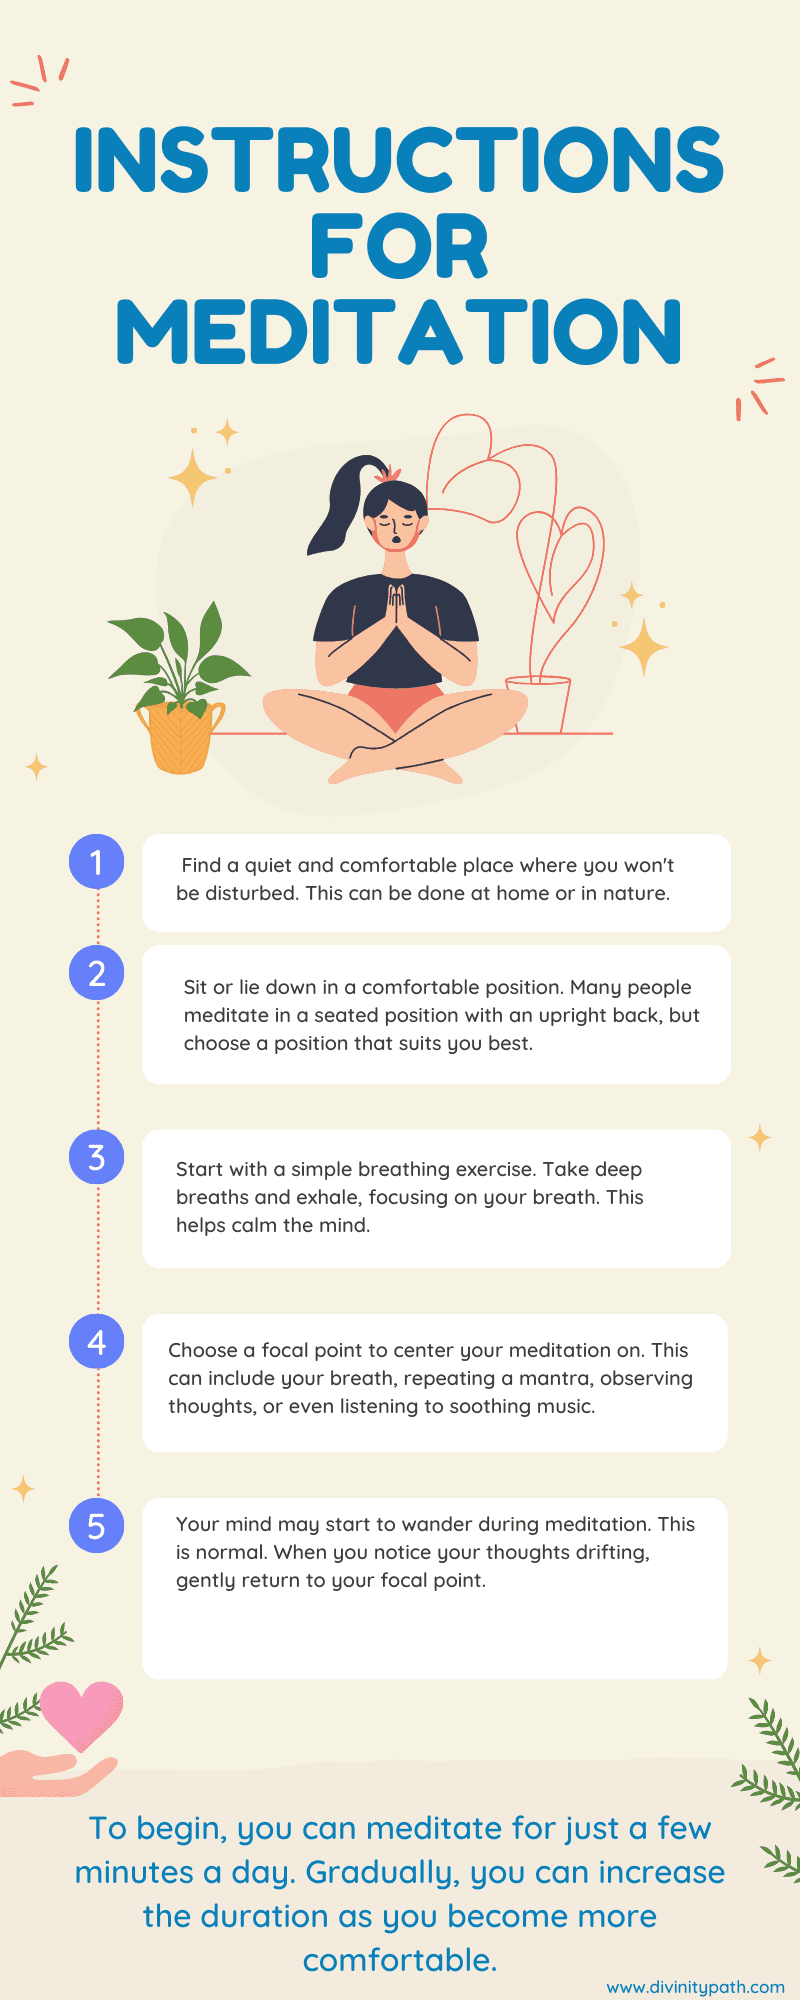 Discover The Incredible Benefits Of Meditation And Its Debunked Myths